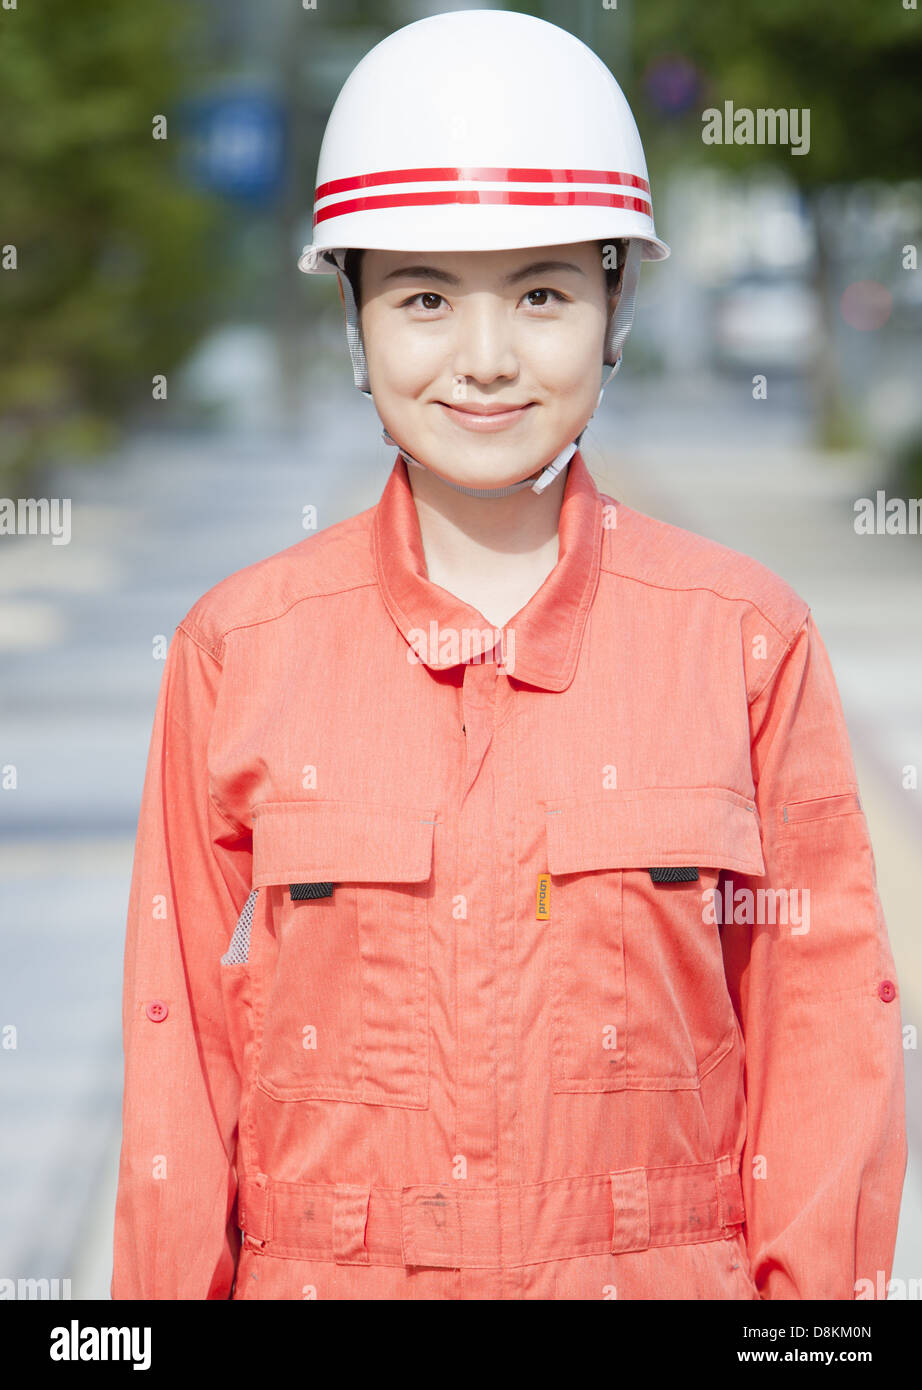 Rescue worker Stock Photo